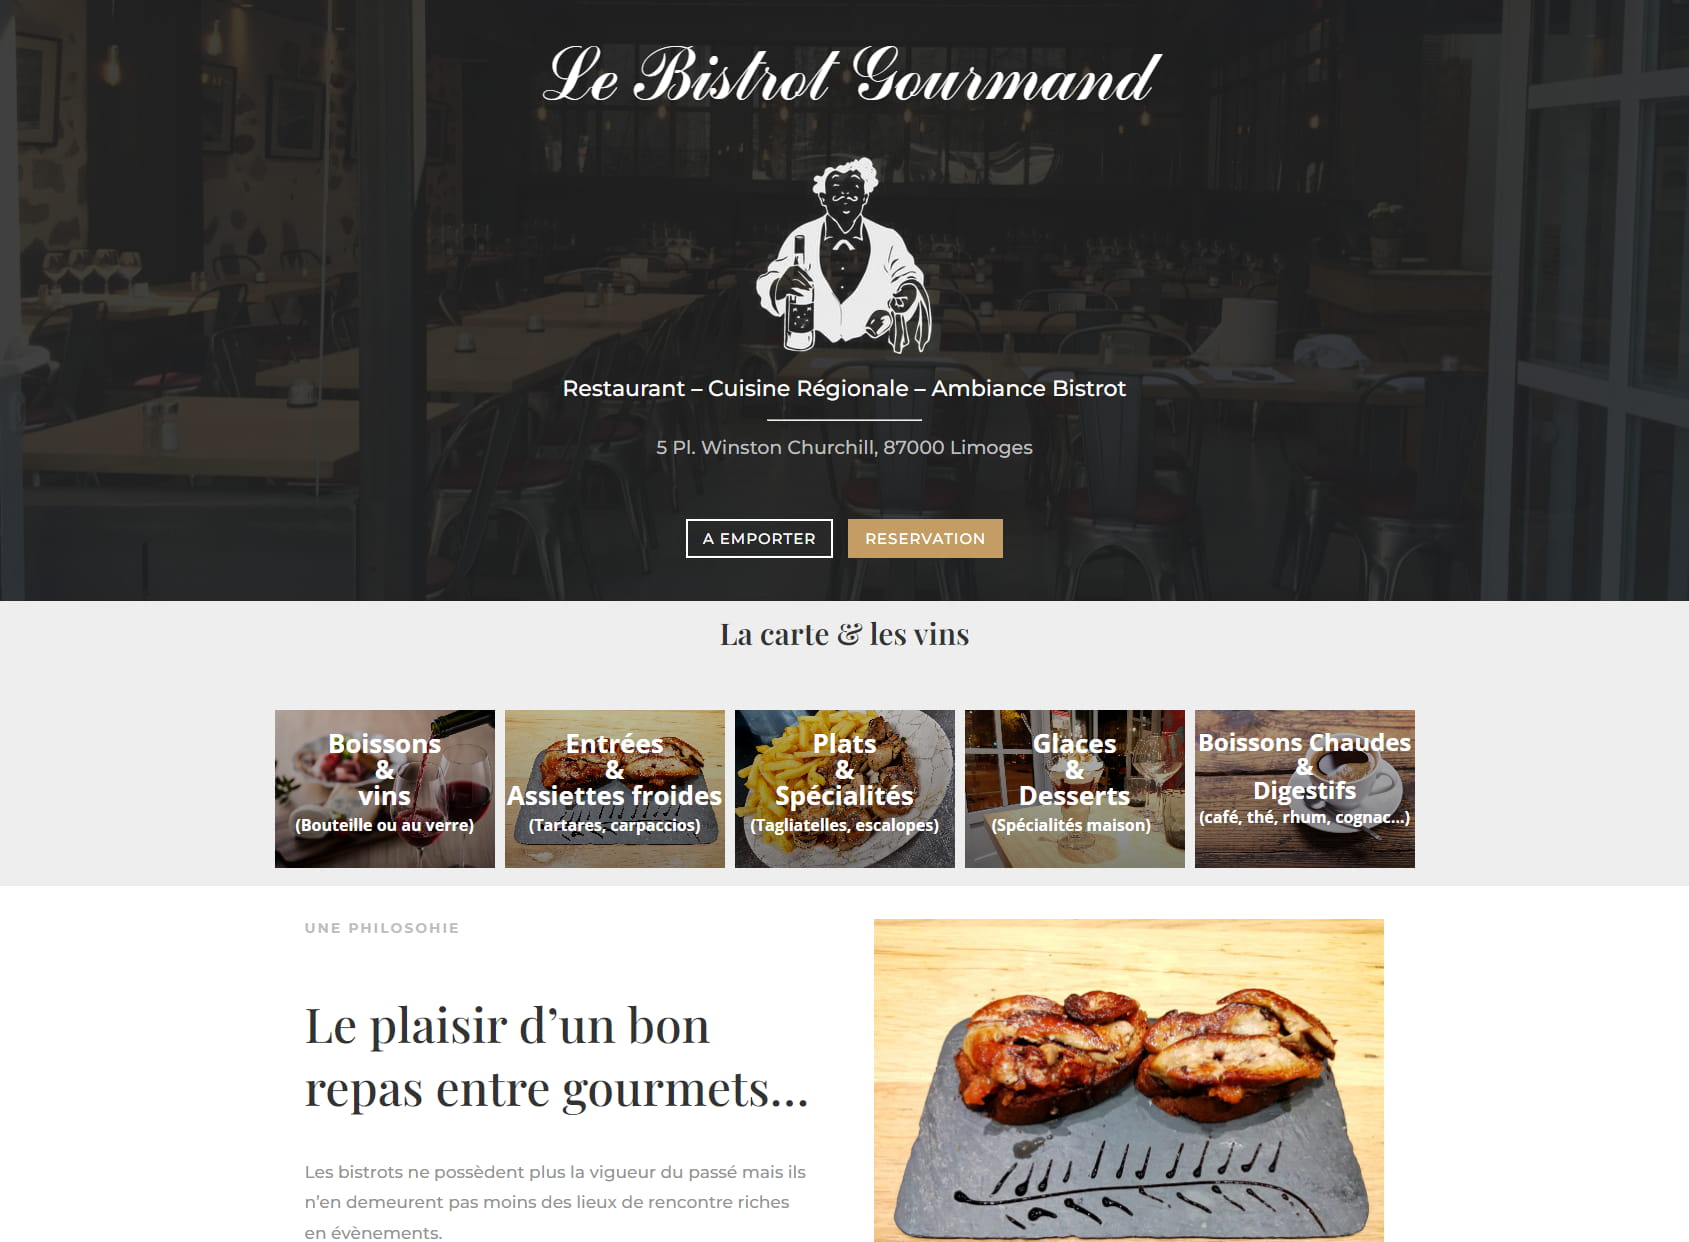 LE BISTROT GOURMAND